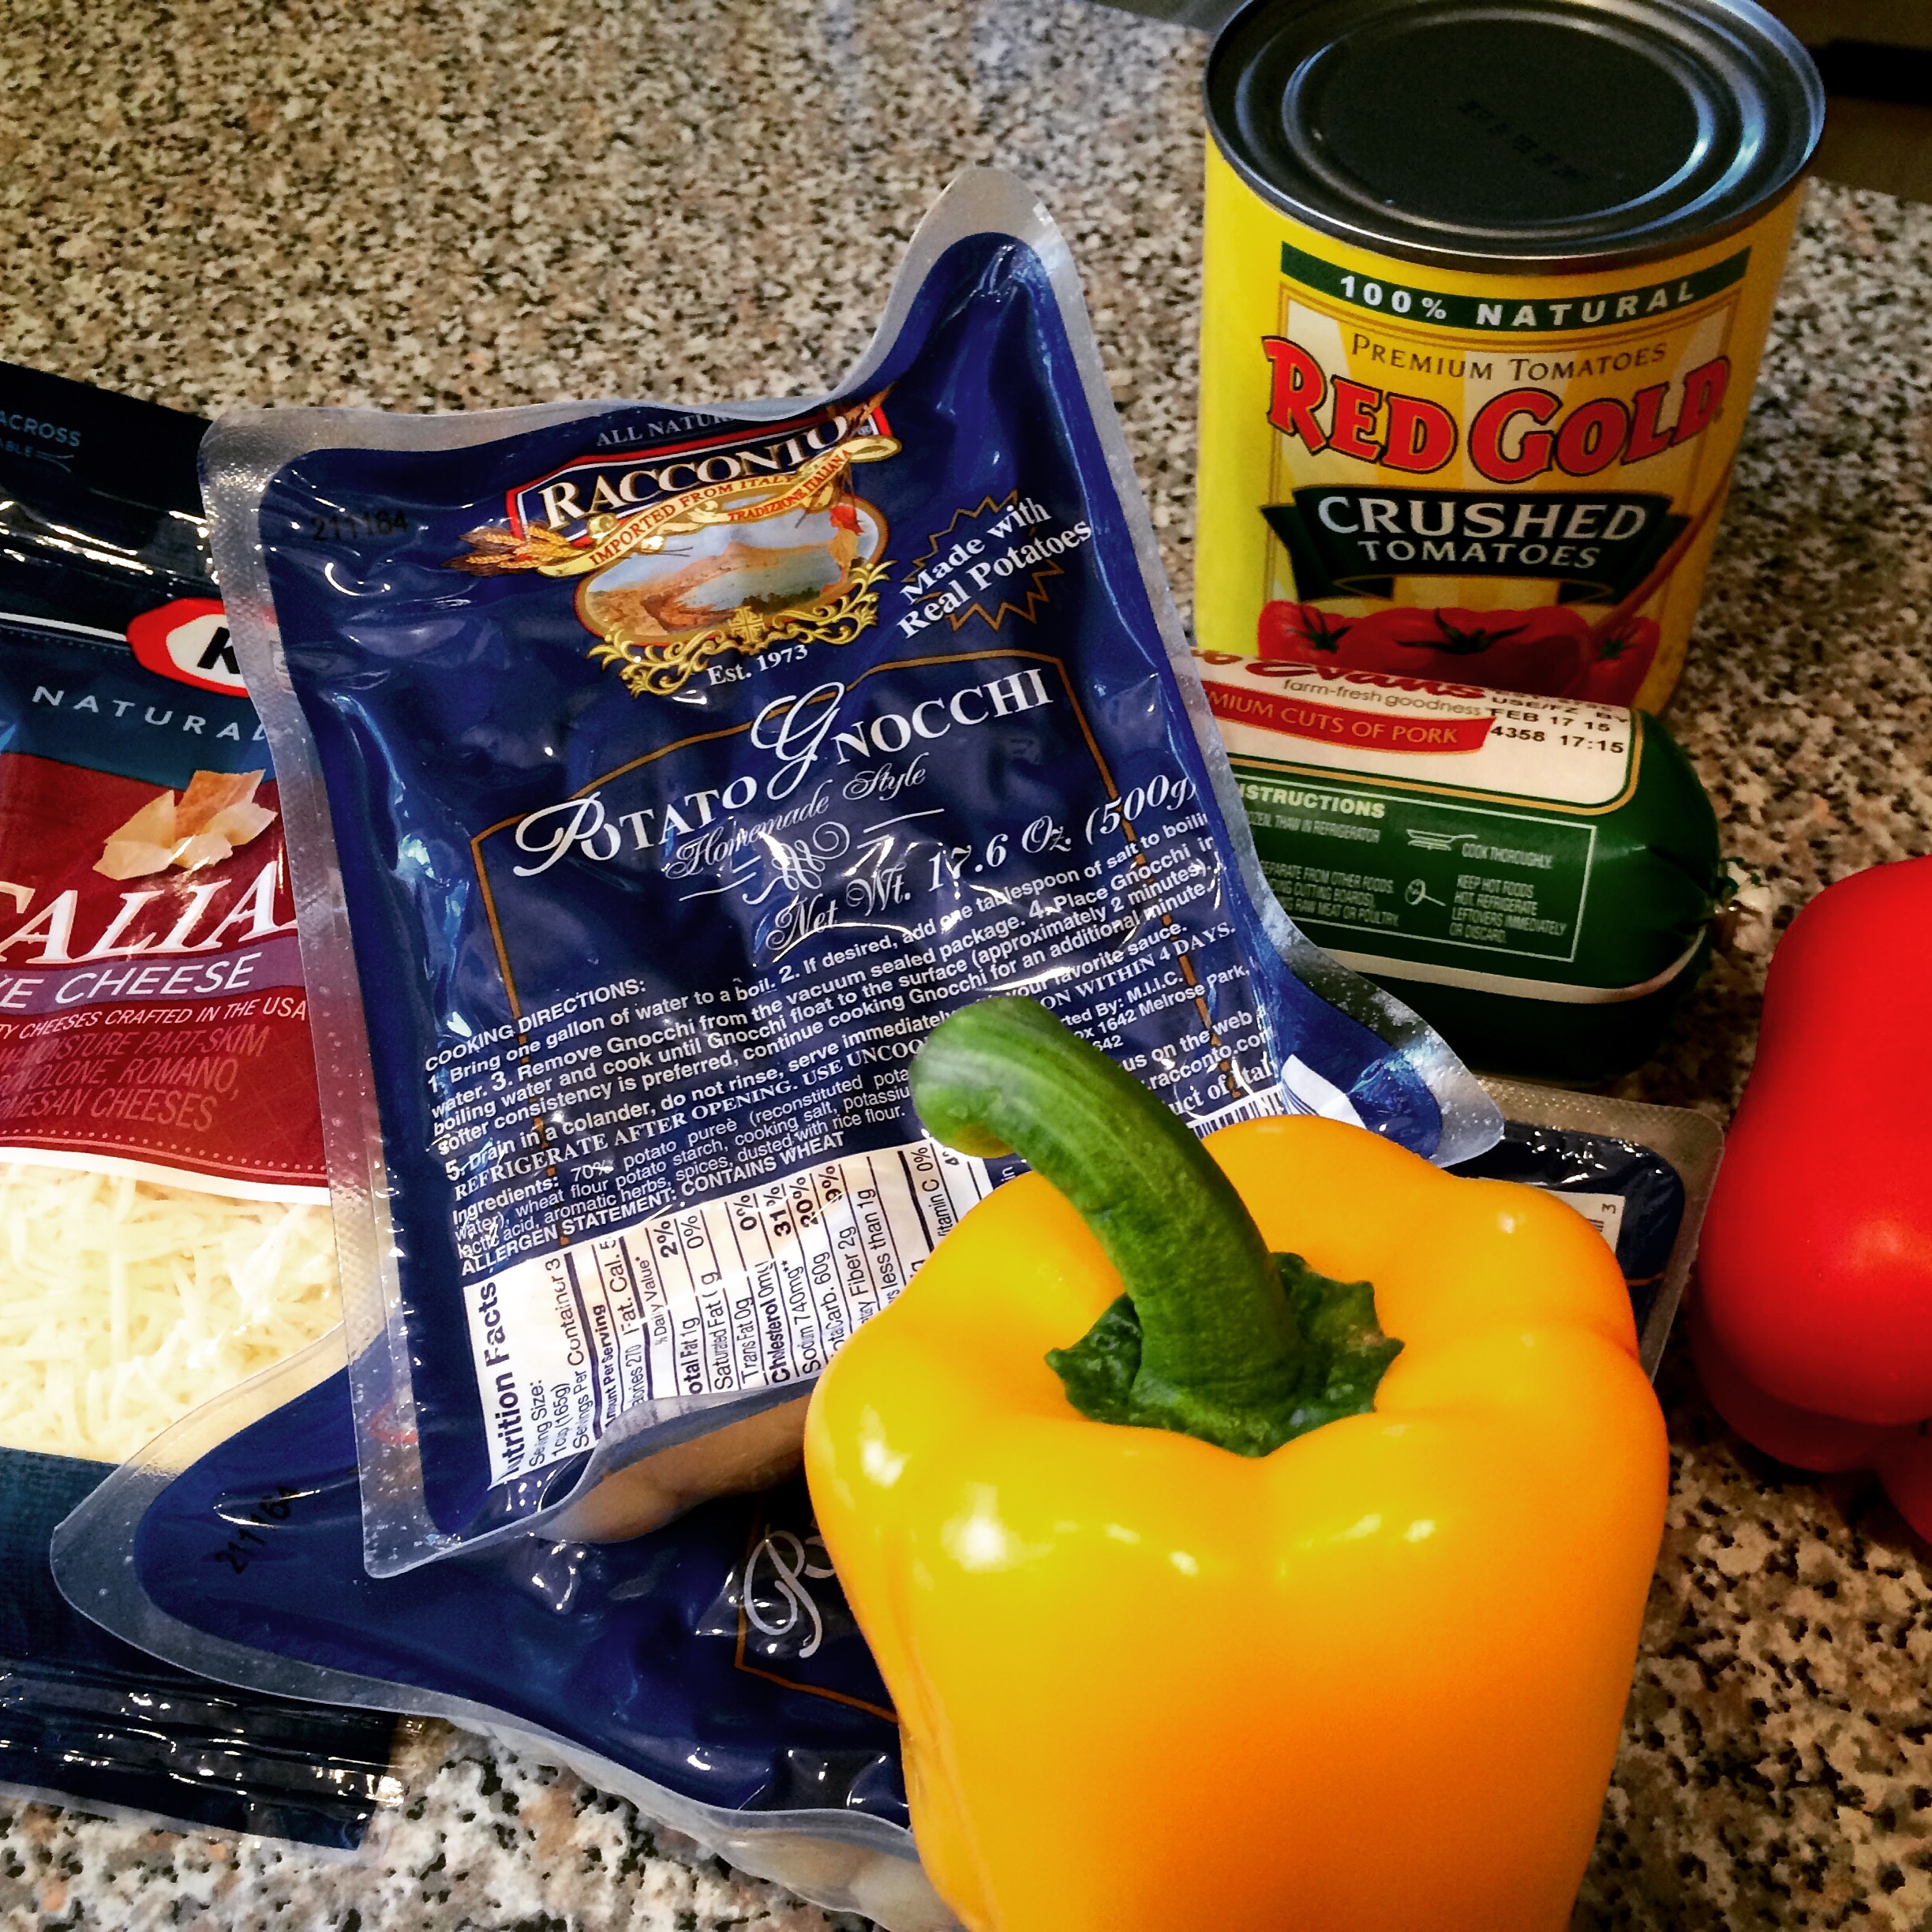 Ingredients to make Baked Gnocchi with Sausage and Peppers